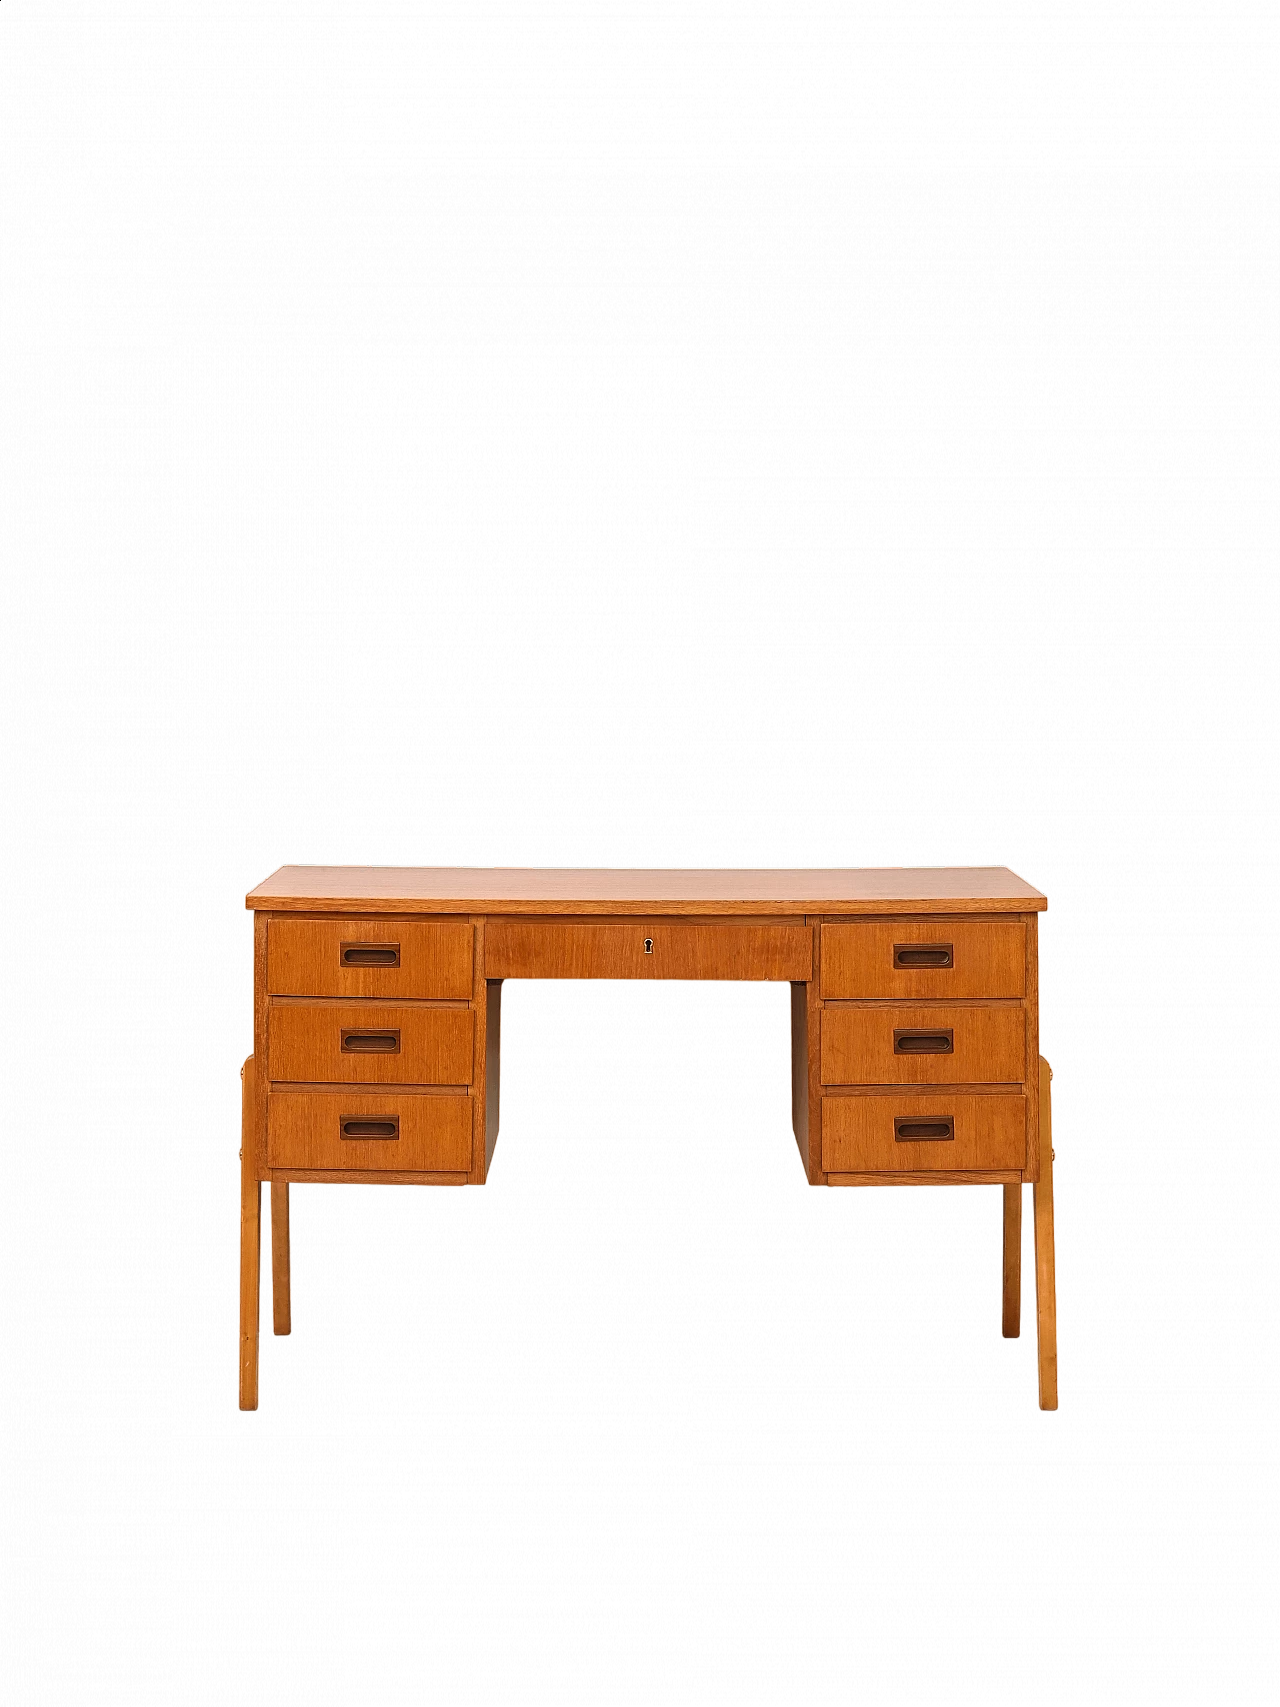 Teak desk with drawers on the sides, 1960s 16